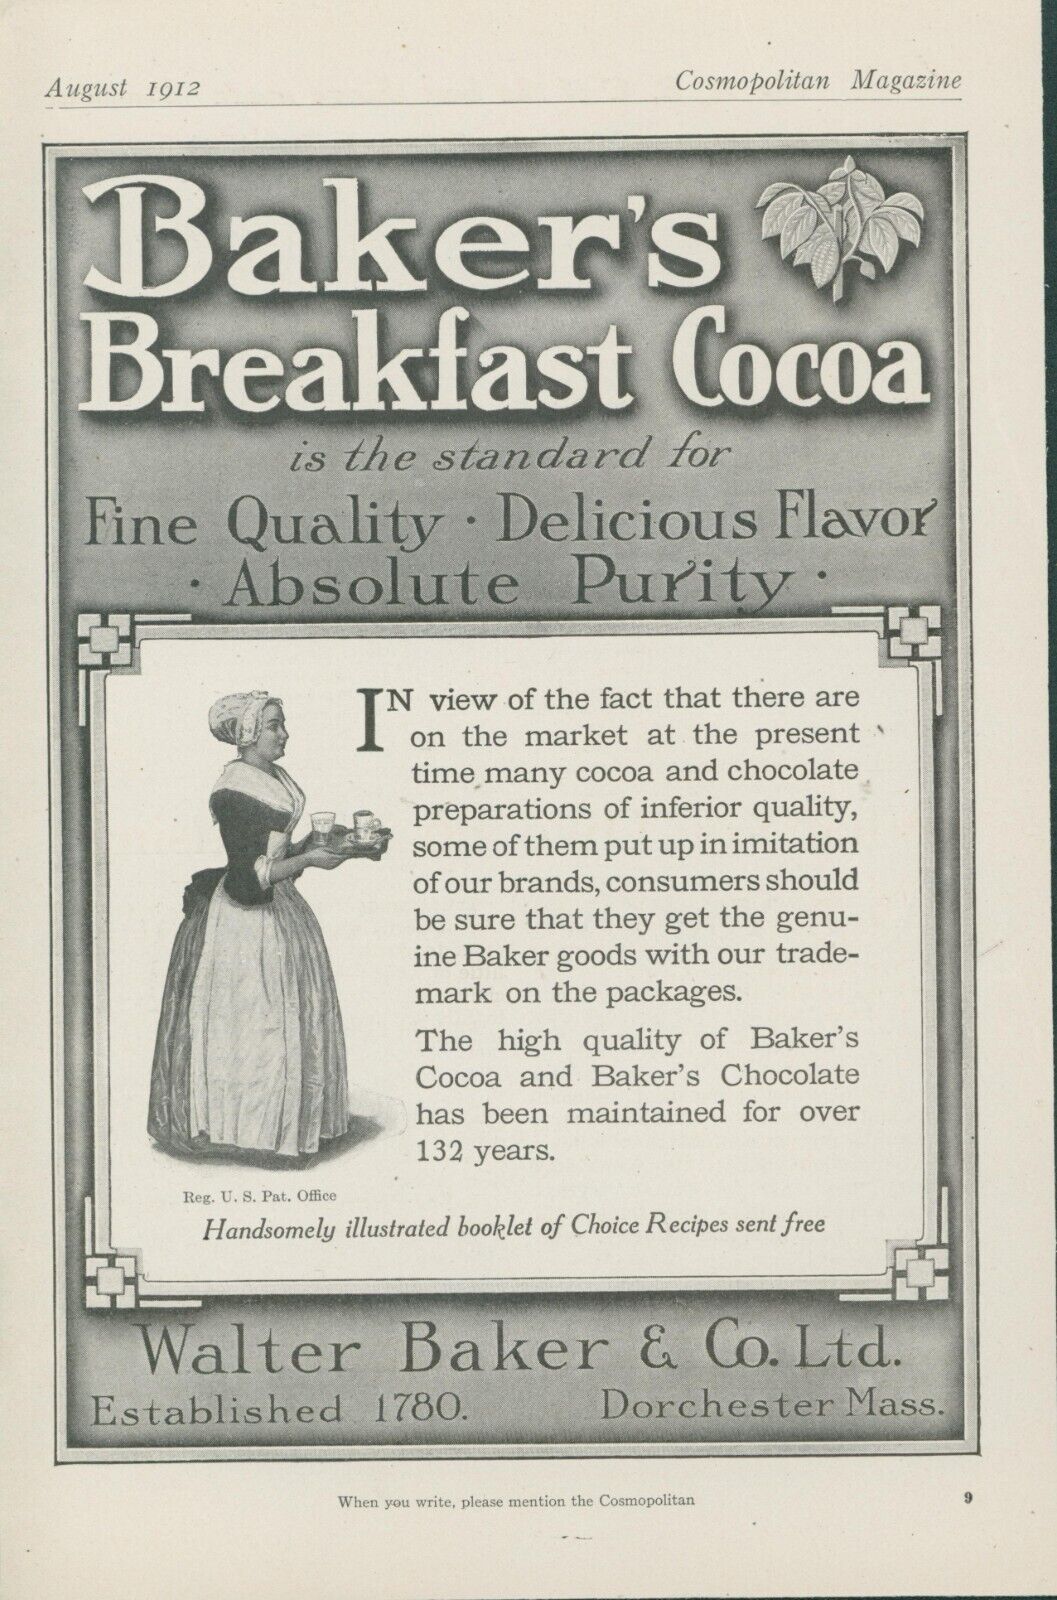 1912 Bakers Breakfast Cocoa Server Tray Glasses Recipe Book Offer Print Ad CO4